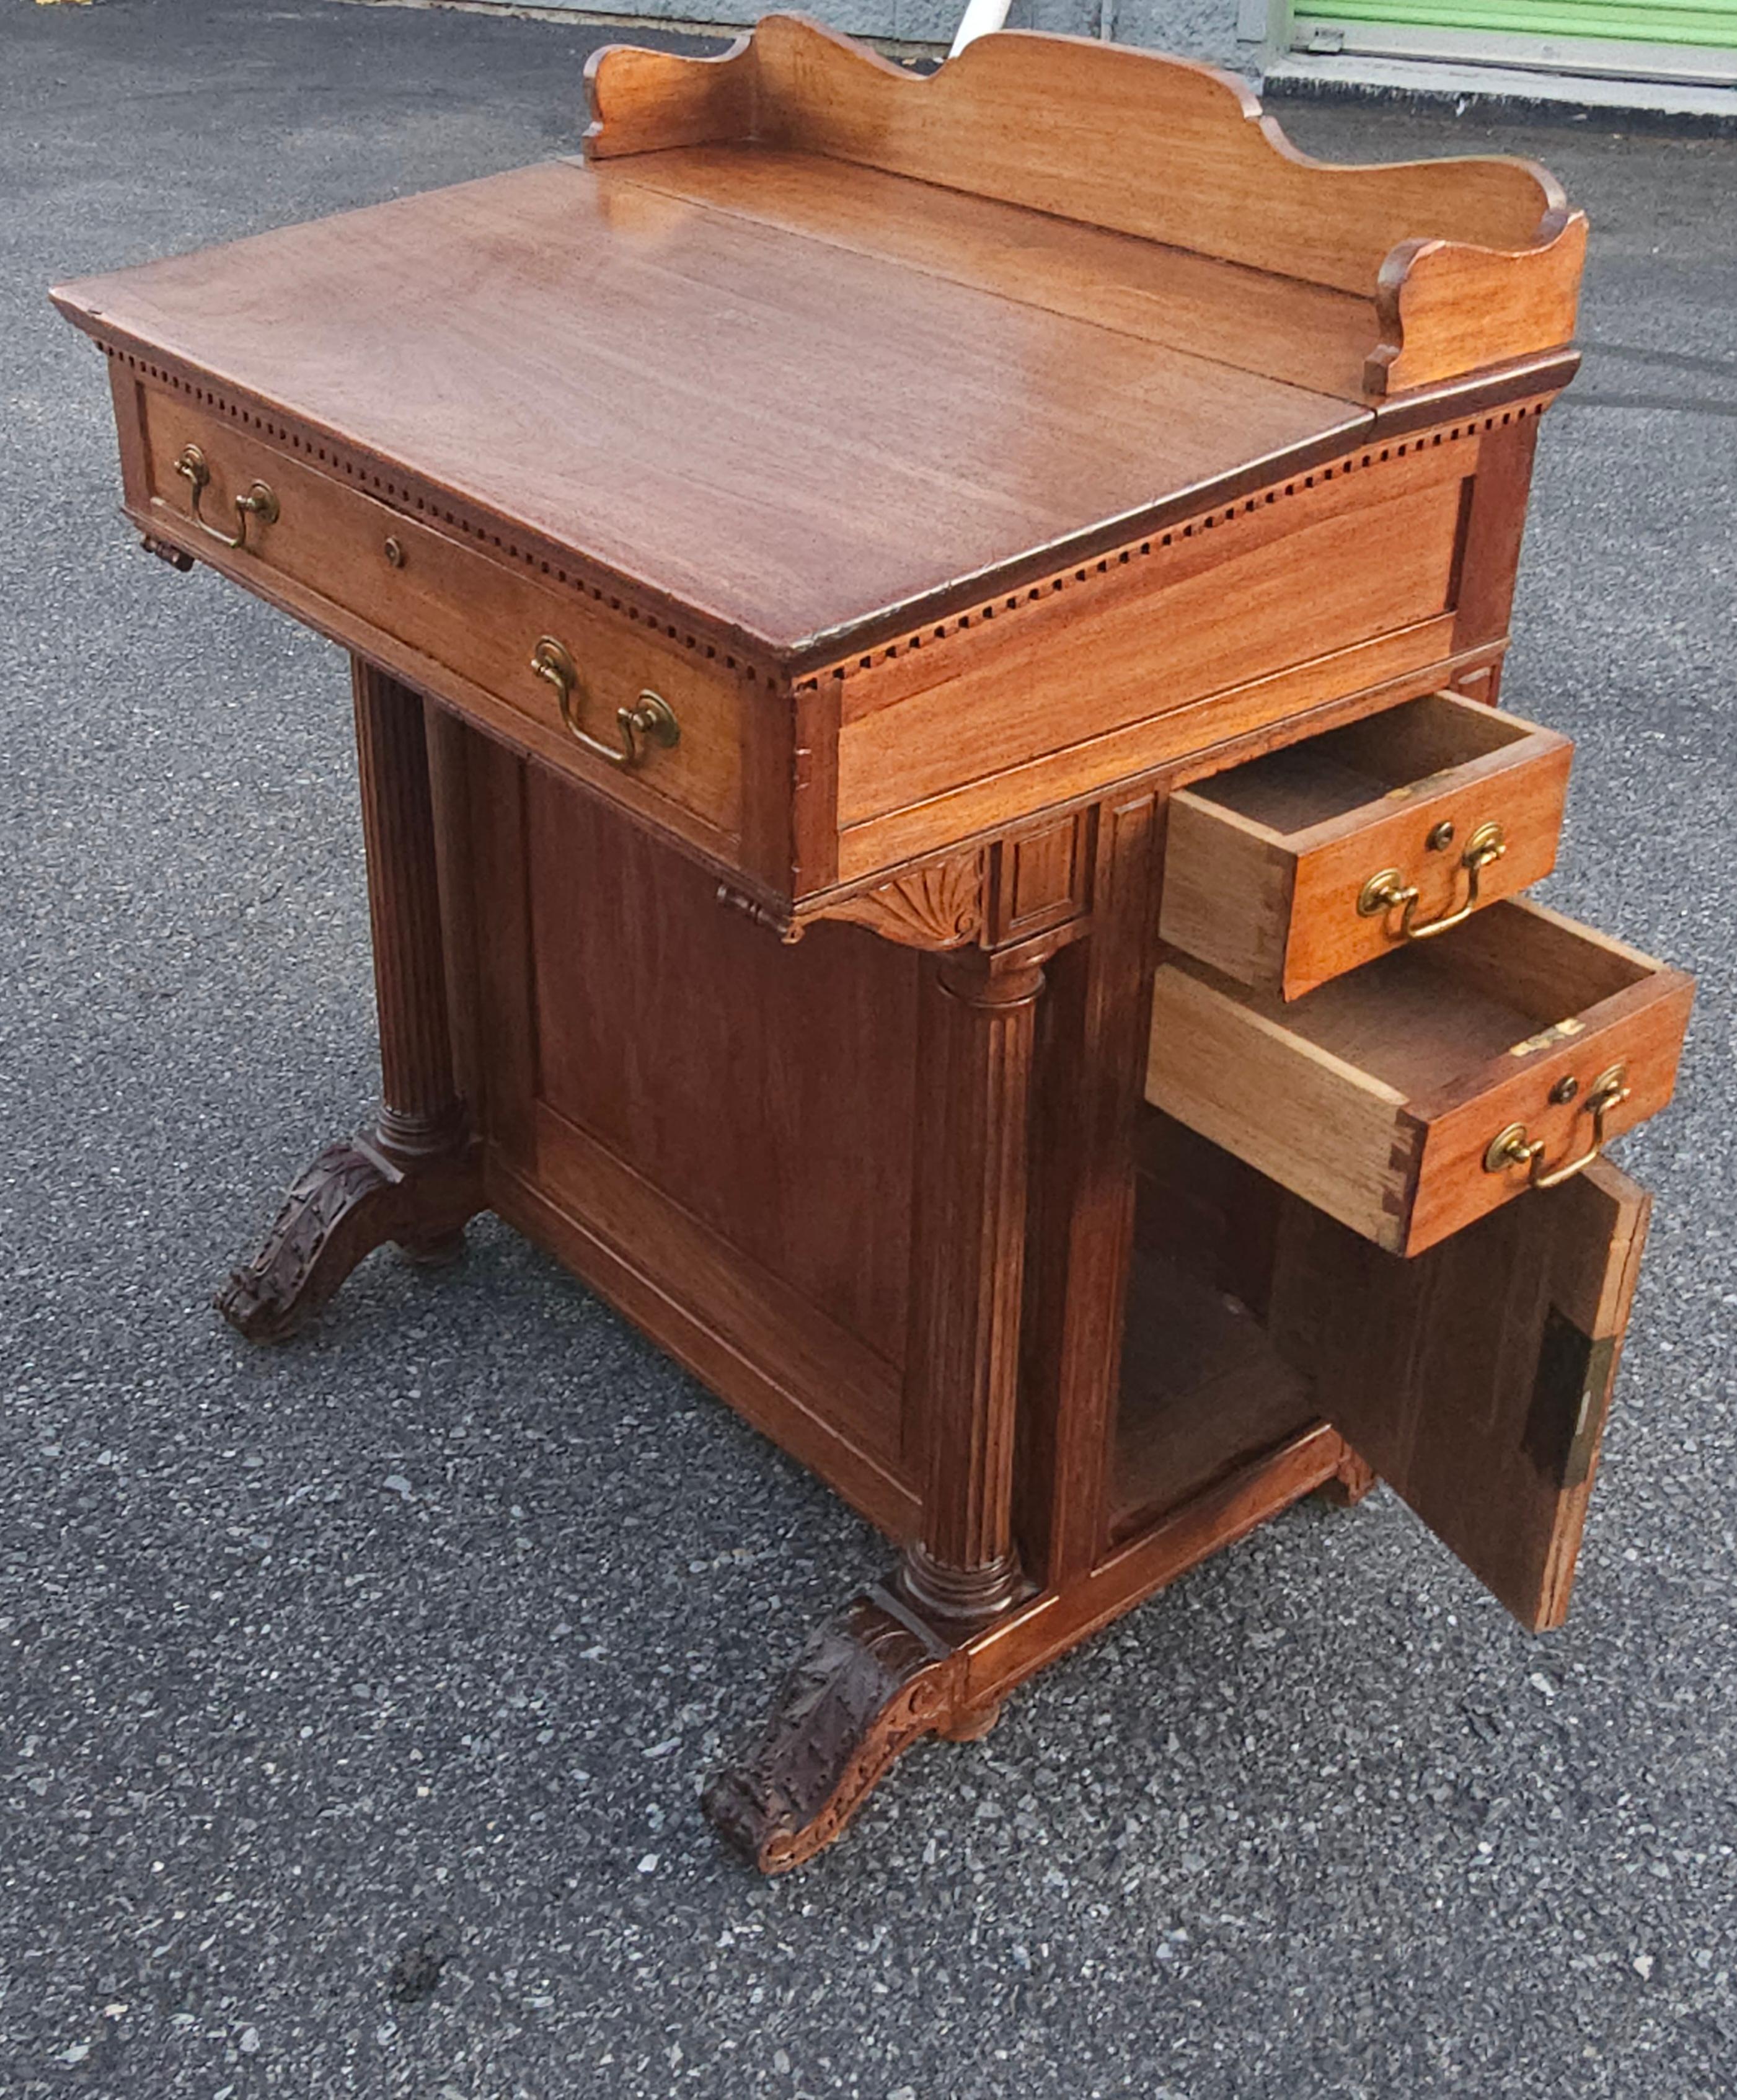 Other 19th Century Victorian Five-Drawer Walnut Davenport Desk For Sale